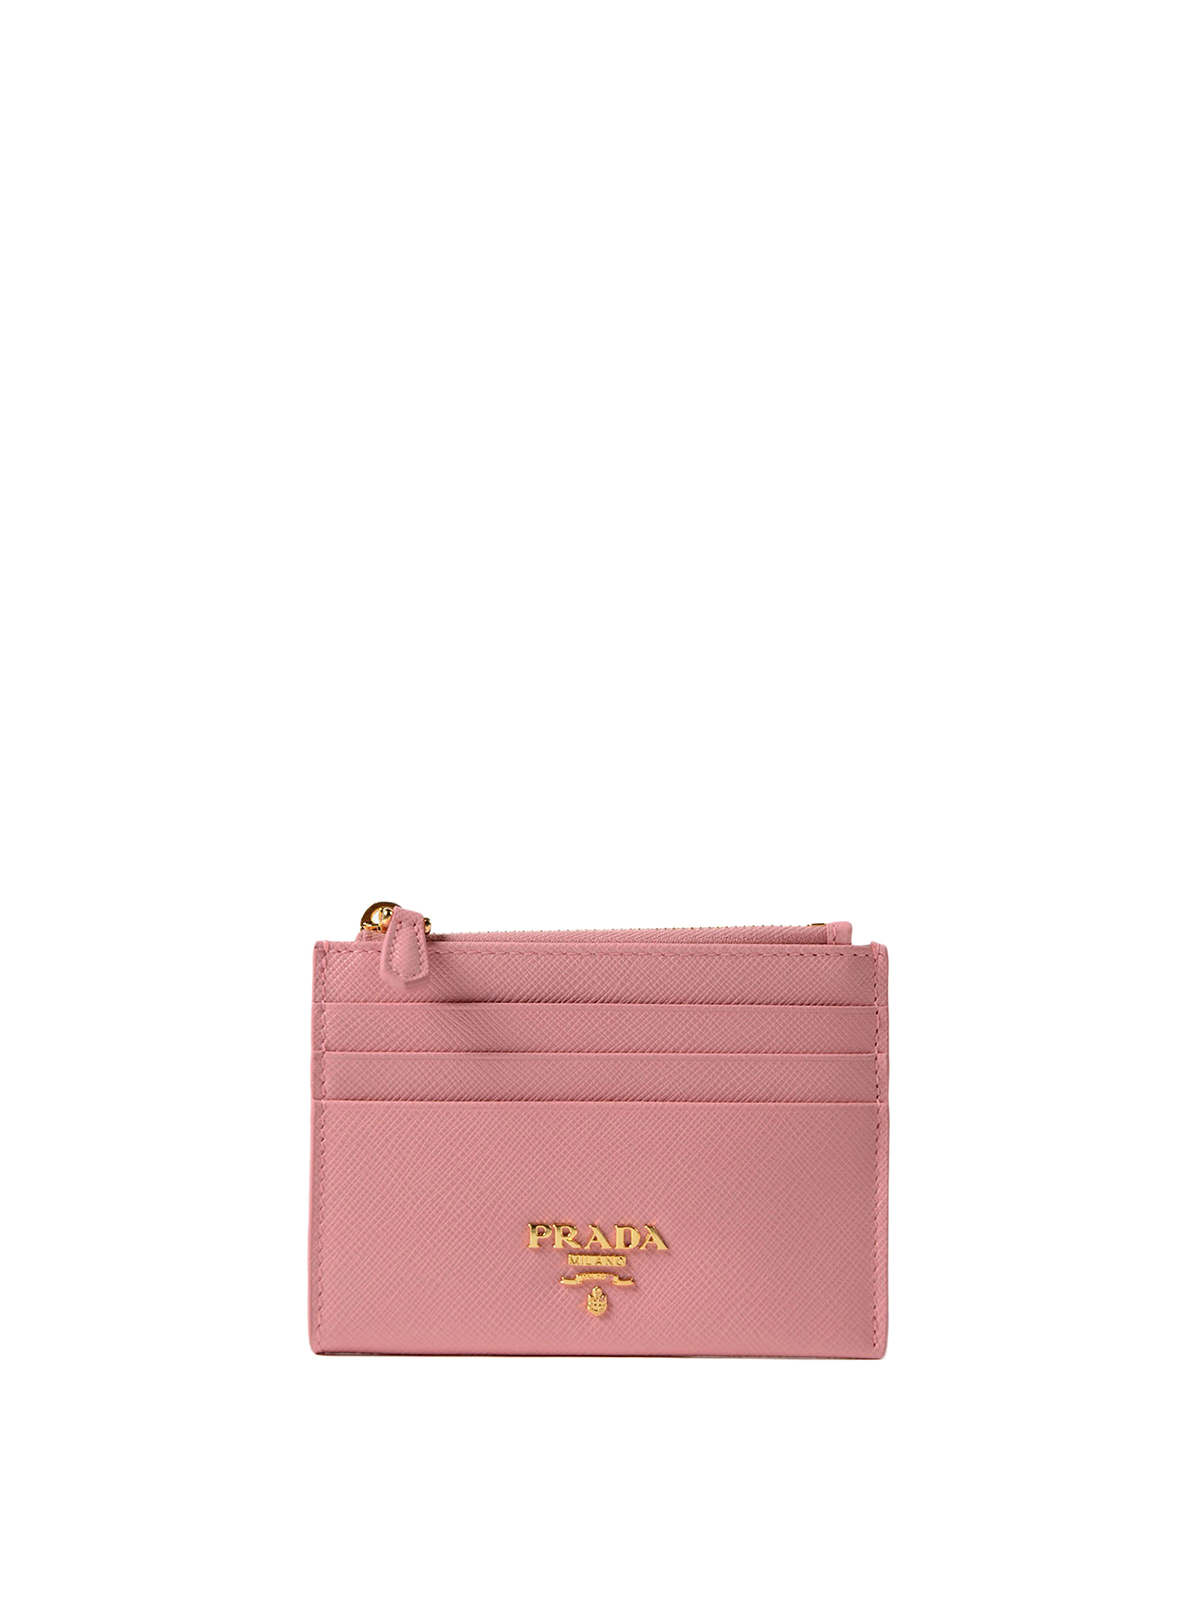 Authentic Prada Saffiano Pink Leather Wallet